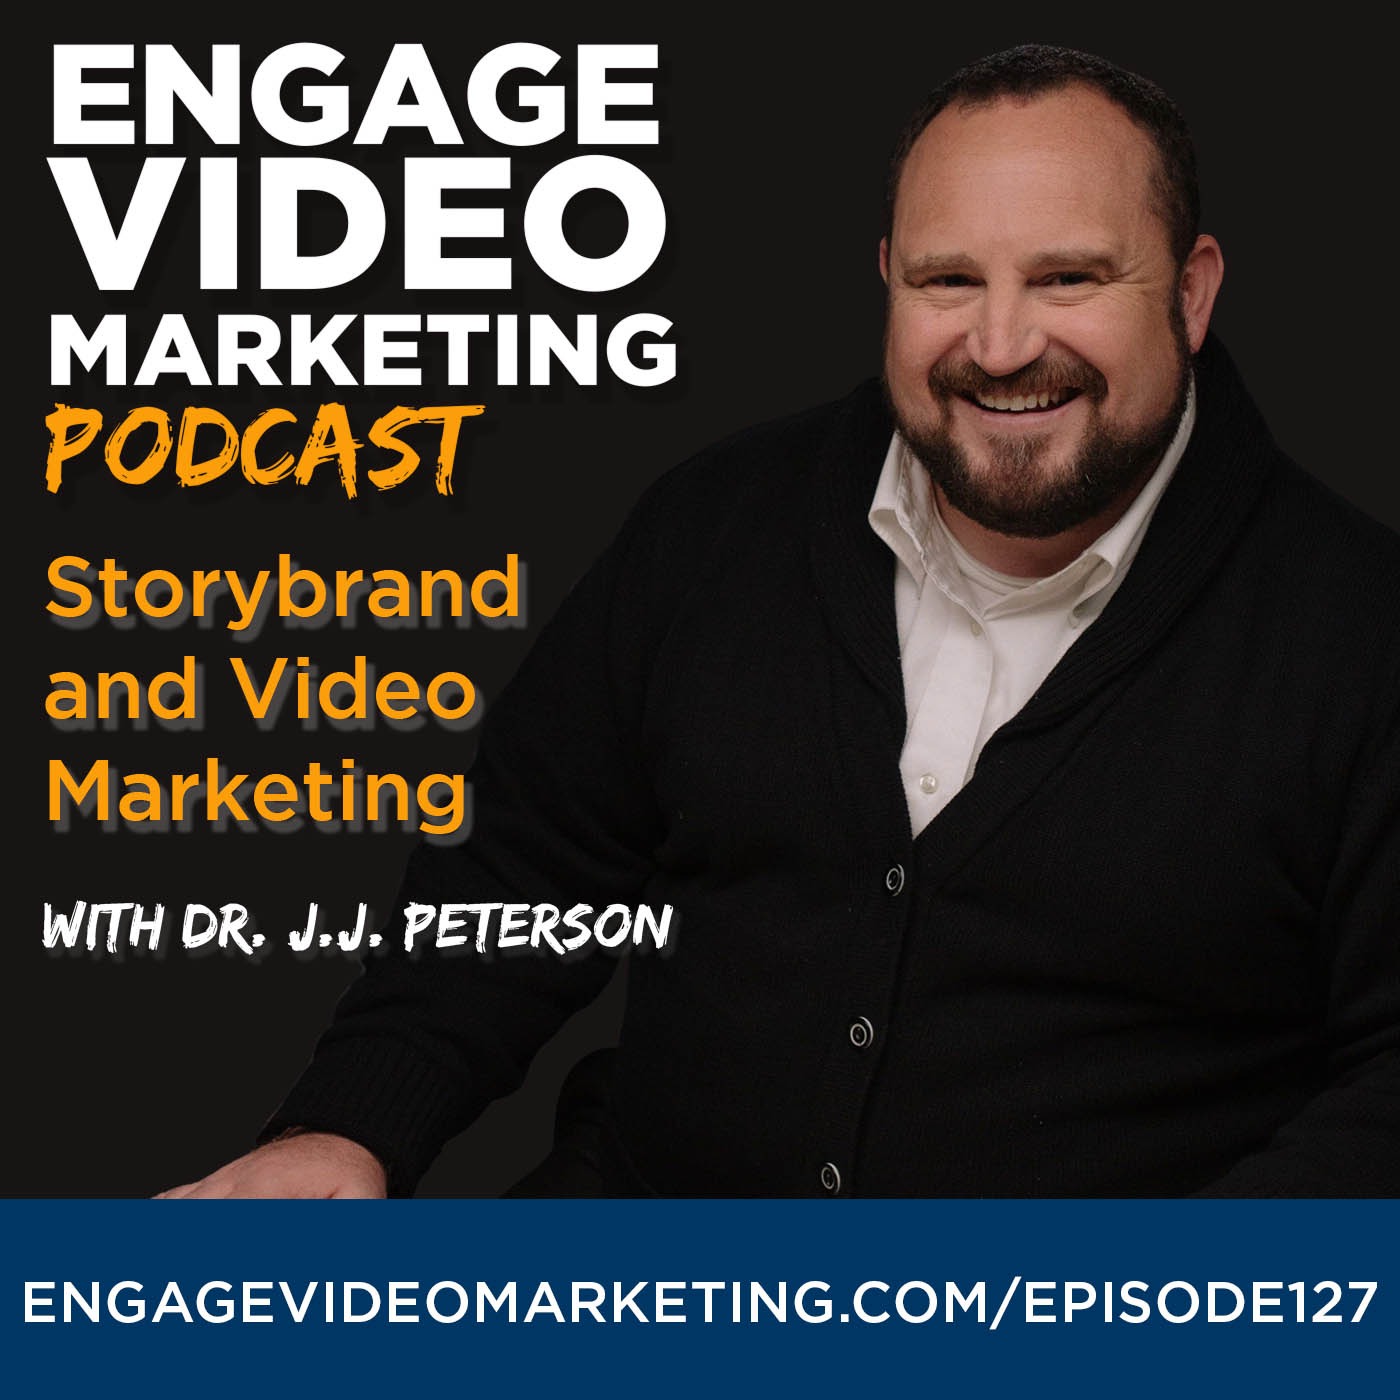 Storybrand and Video Marketing with Dr JJ Peterson